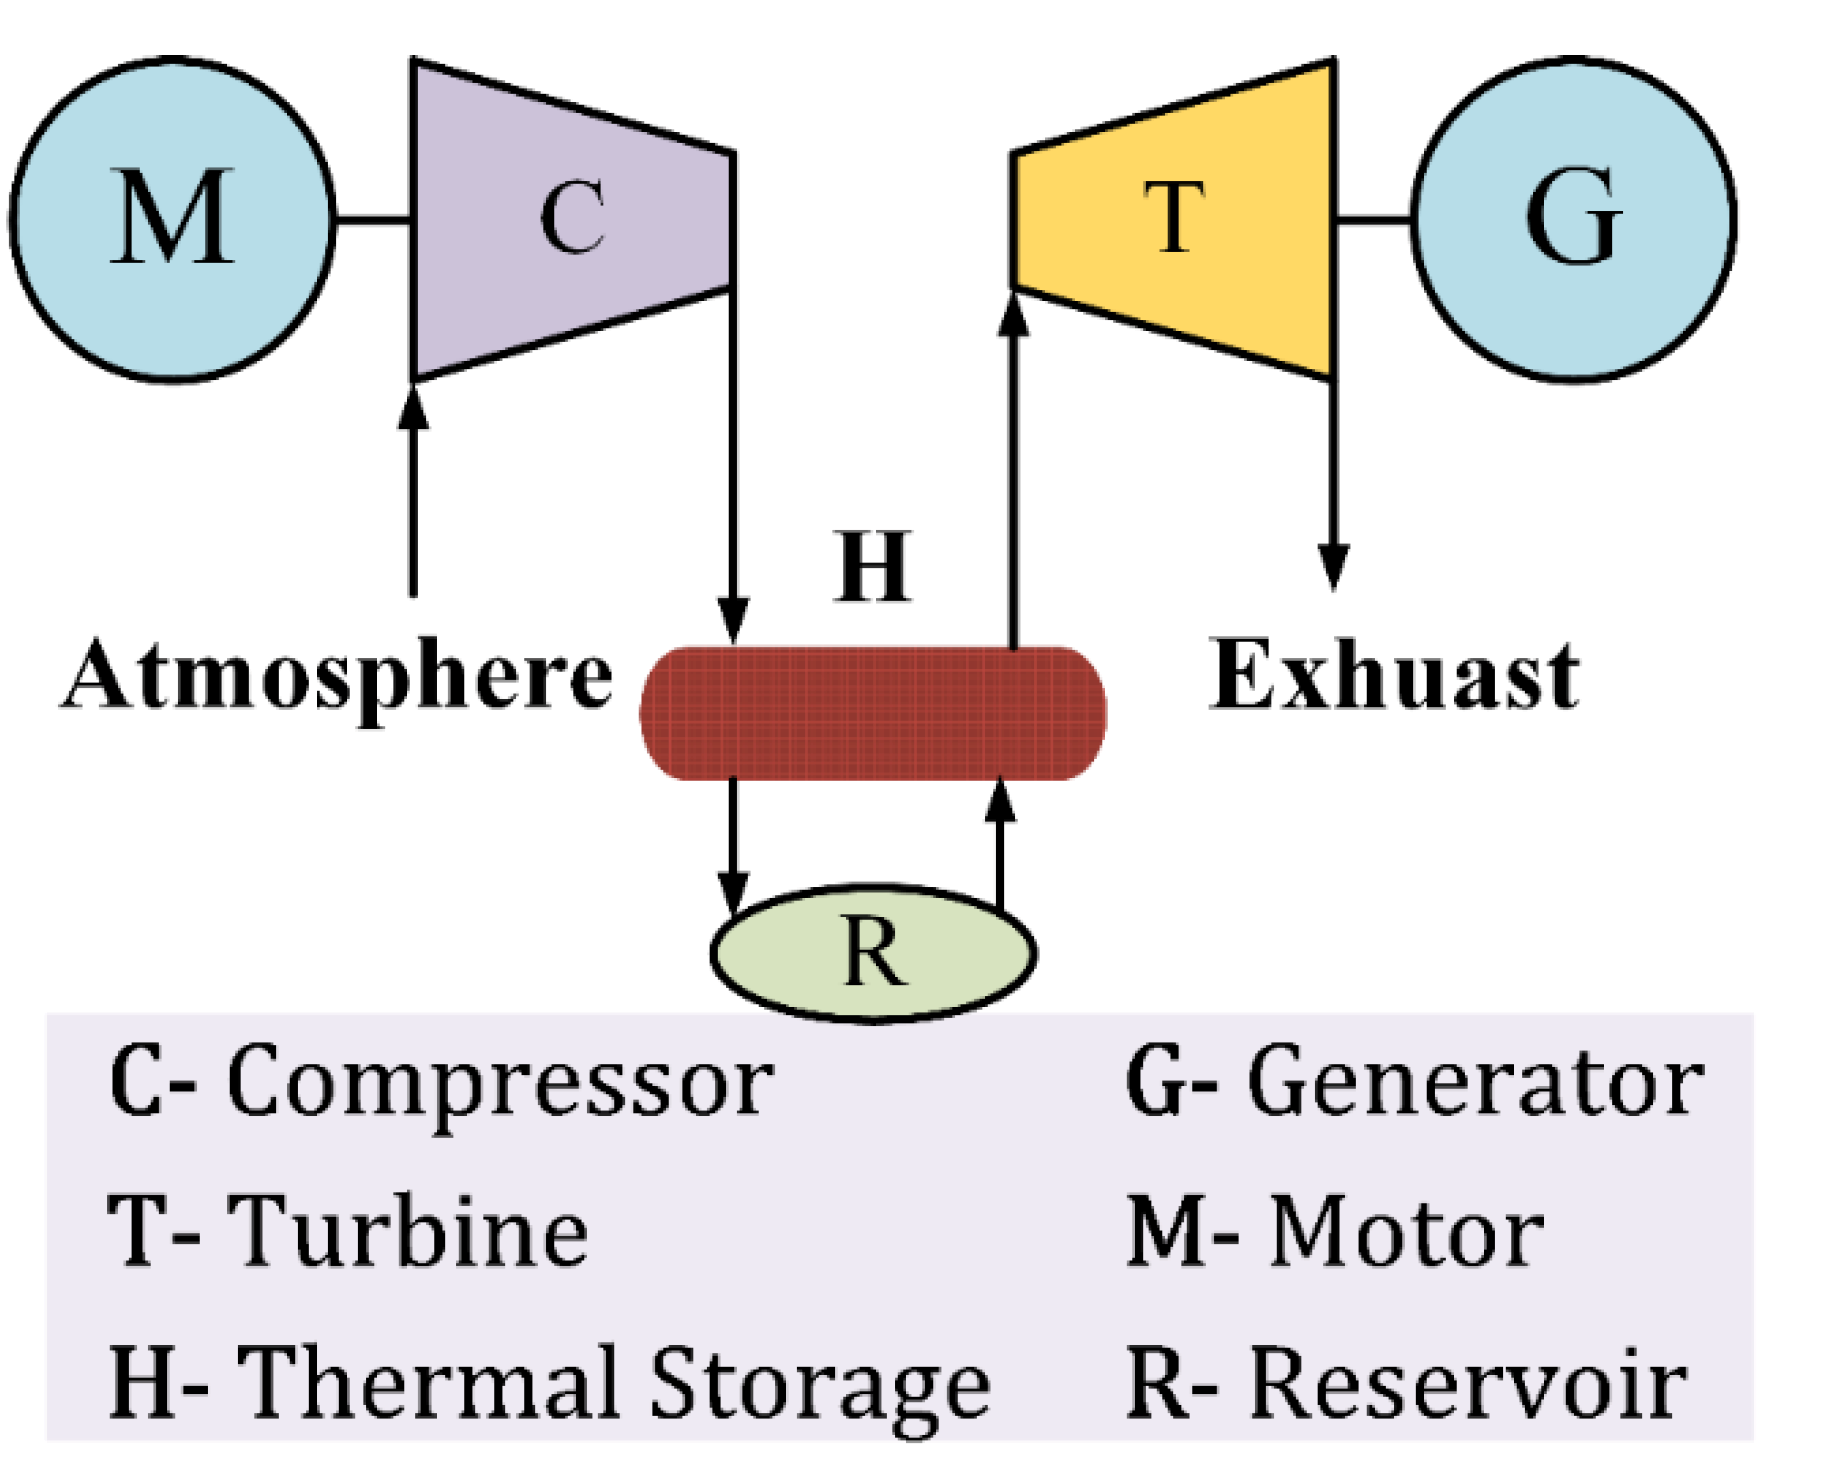 Energies Free Full Text A Comprehensive Review On Energy Storage Systems Types Comparison Current Scenario Applications Barriers And Potential Solutions Policies And Future Prospects Html